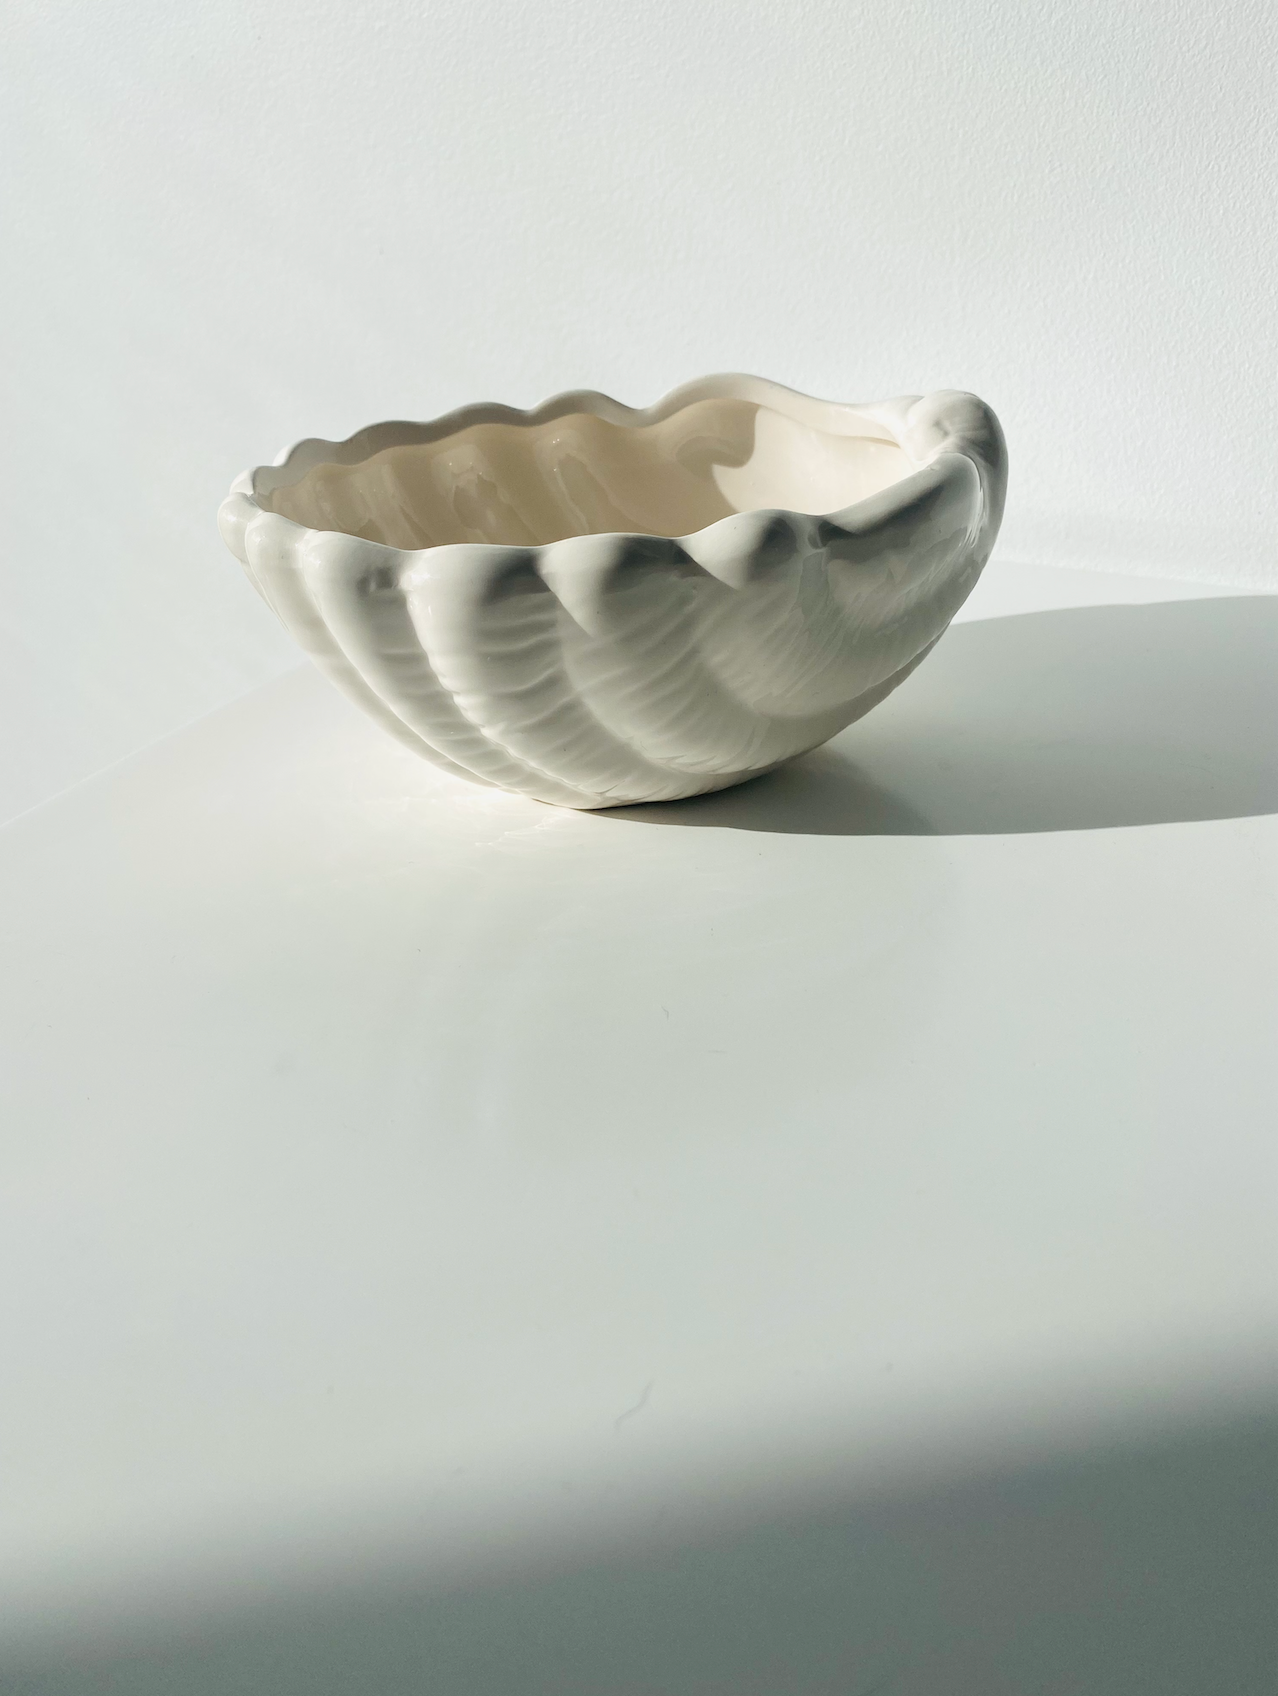 Textured shell bowl/catchall